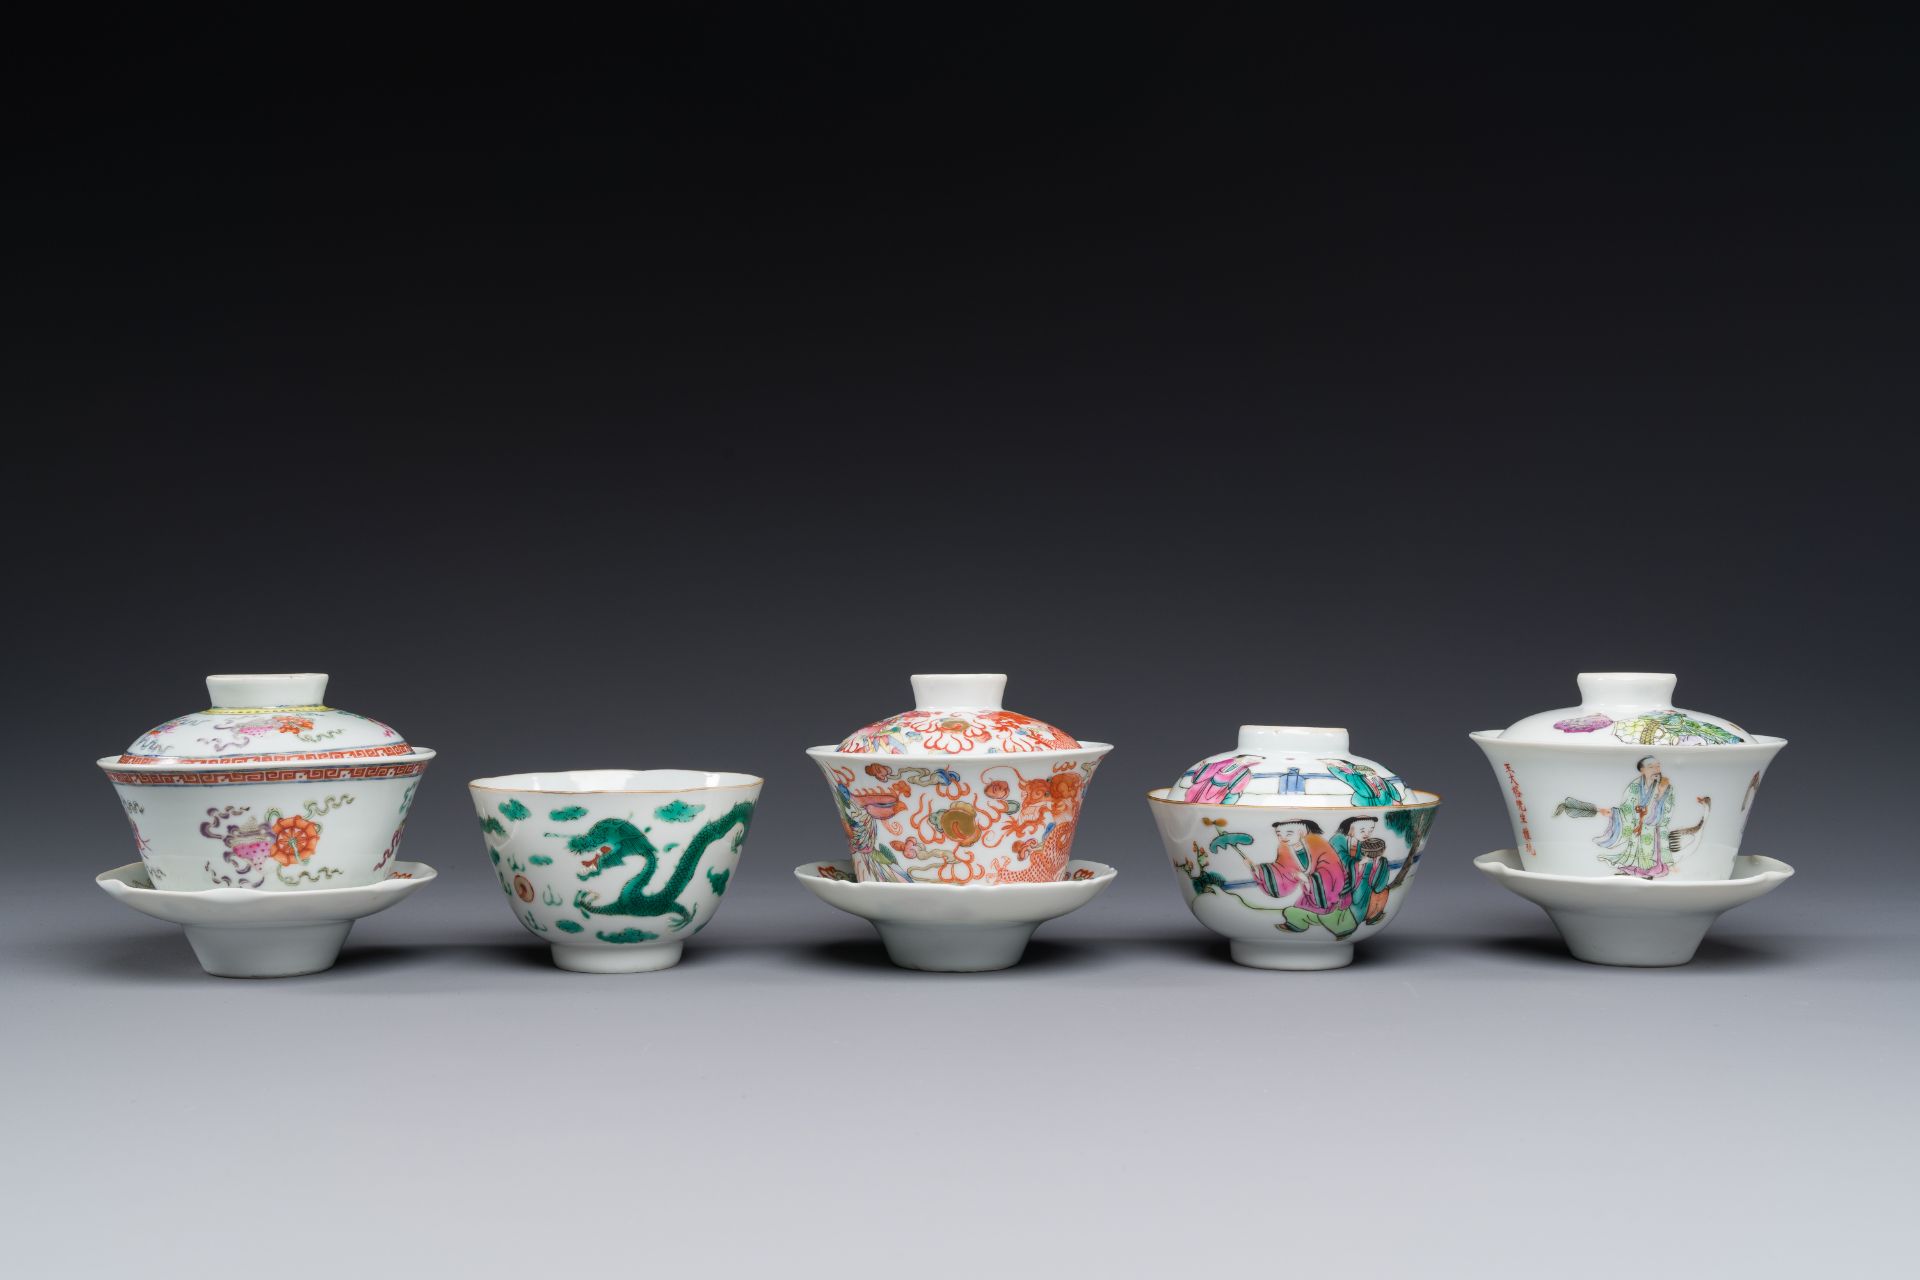 Four Chinese famille rose covered bowls, three with saucers and a 'dragon' bowl, signed Wang Darong - Image 2 of 4